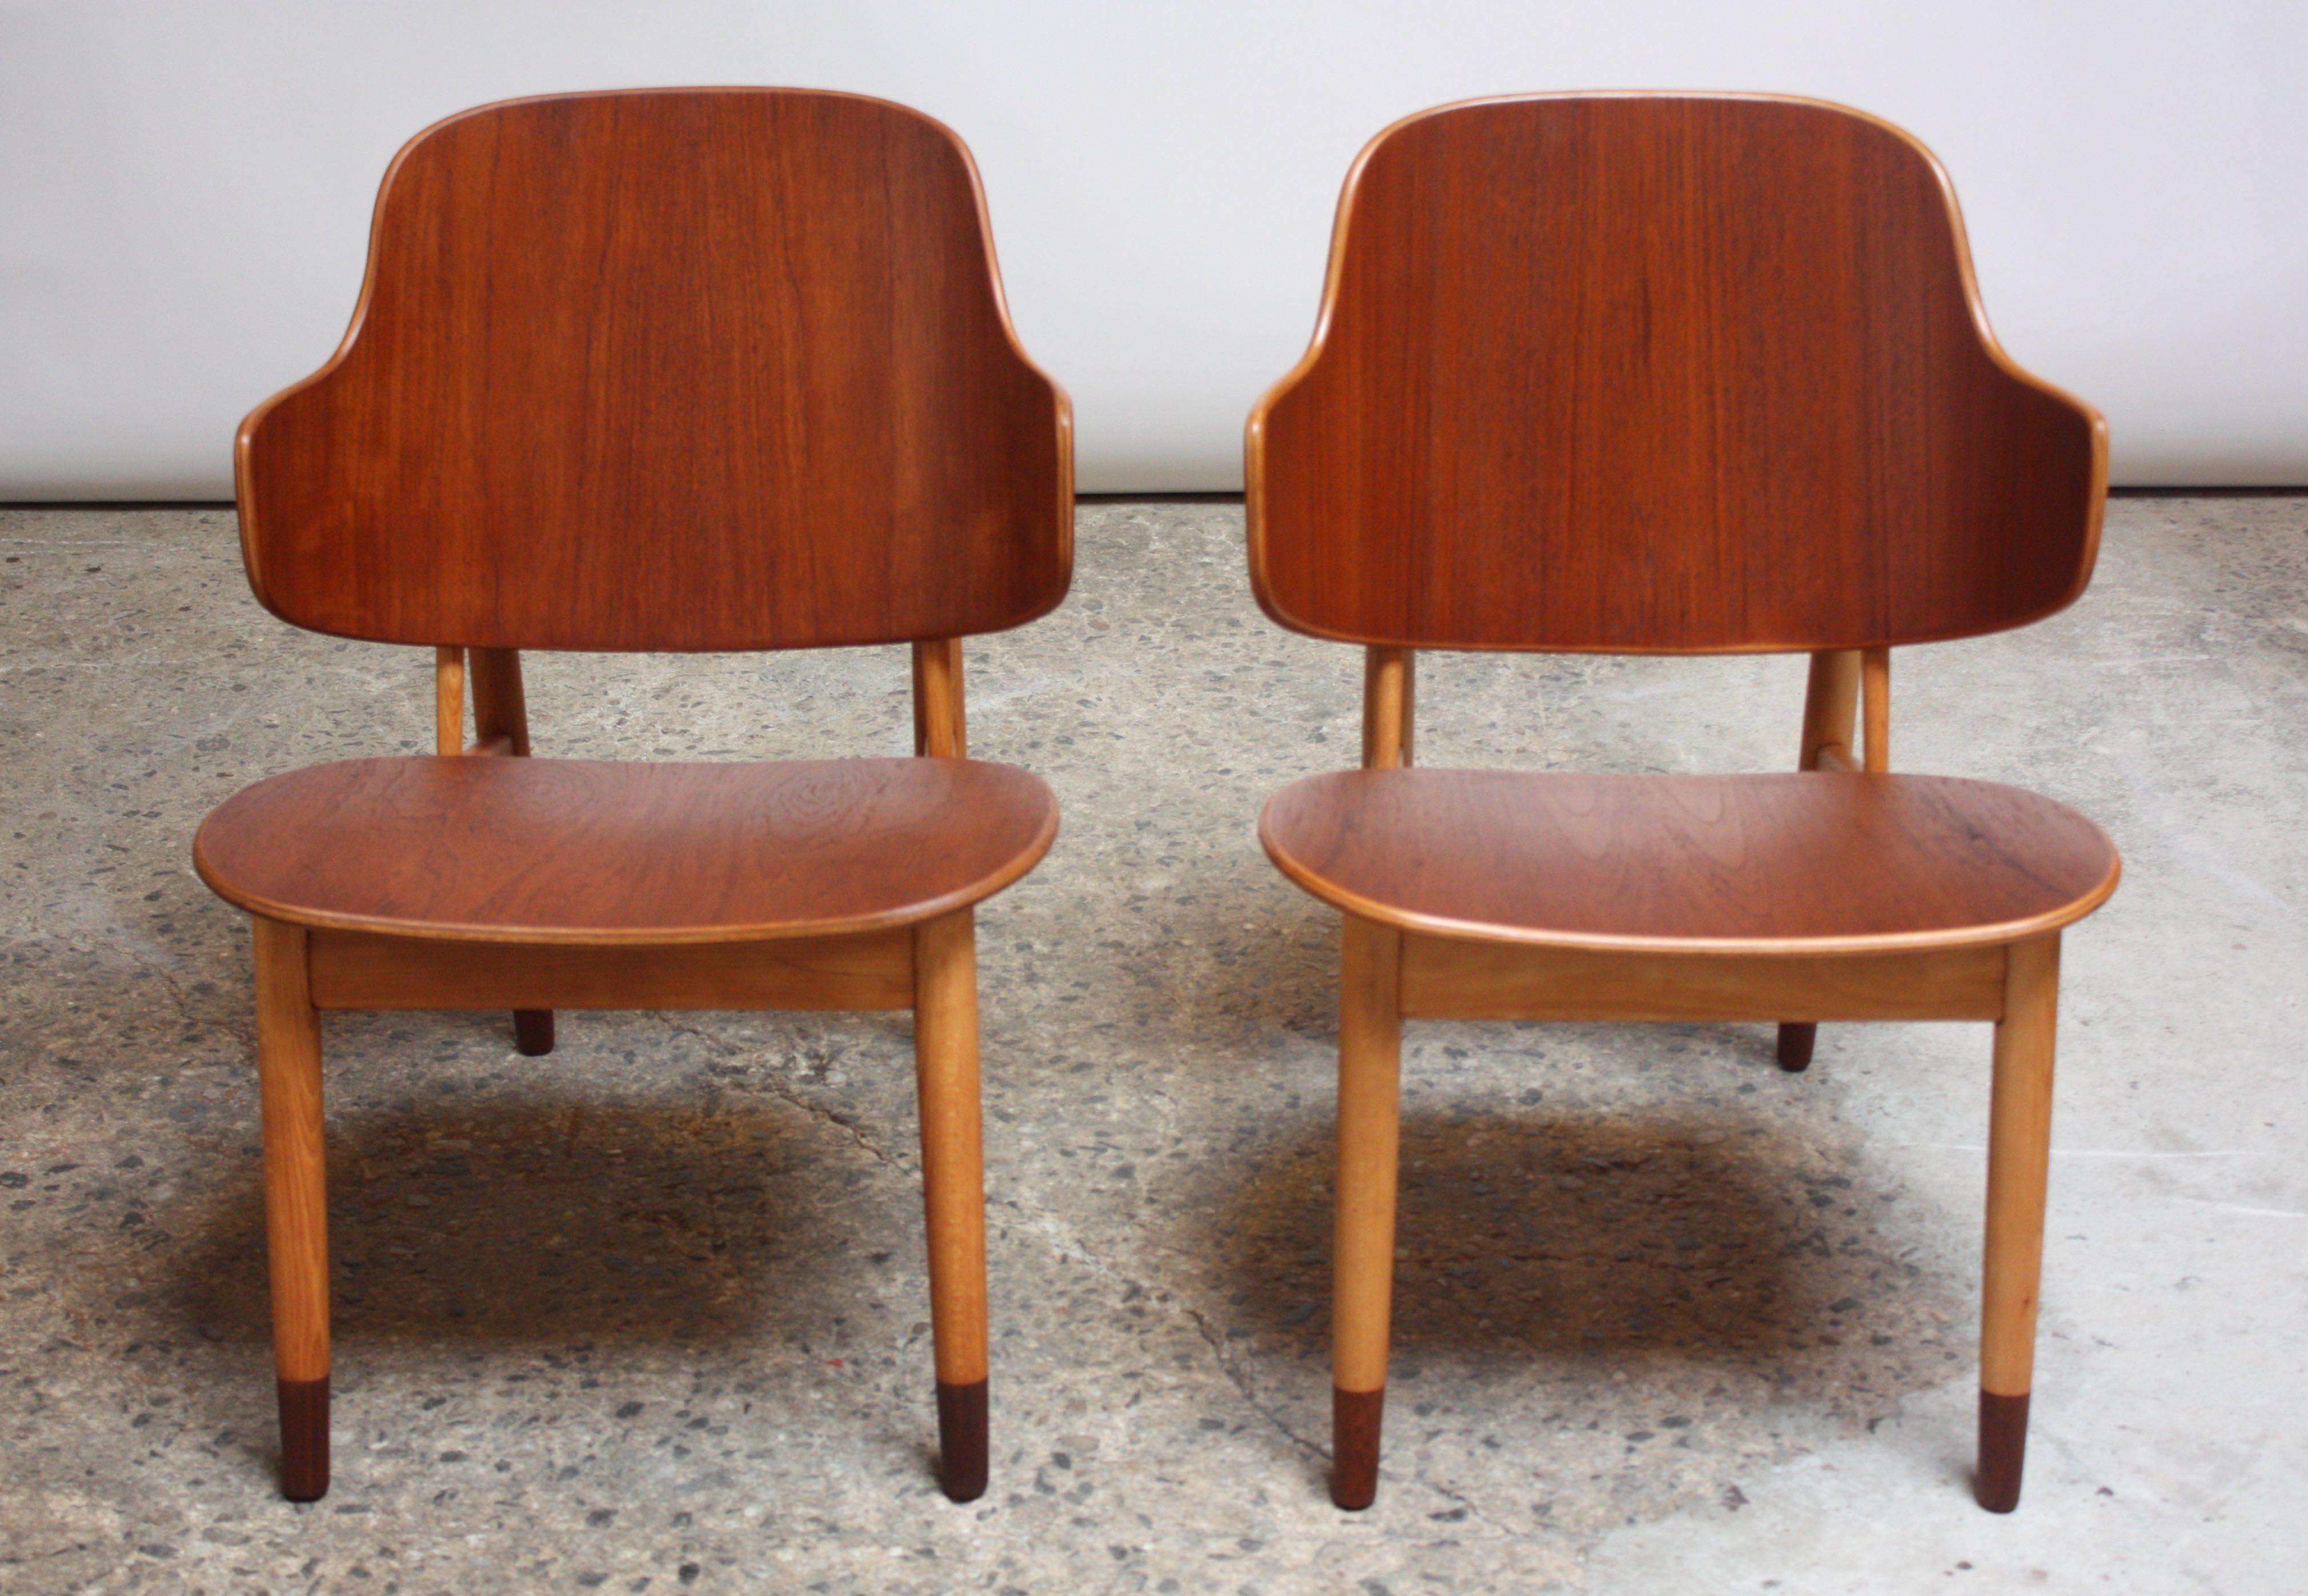 Mid-20th Century Pair of Danish Sculptural Shell Chairs by Ib Kofod-Larsen in Teak and Beech For Sale